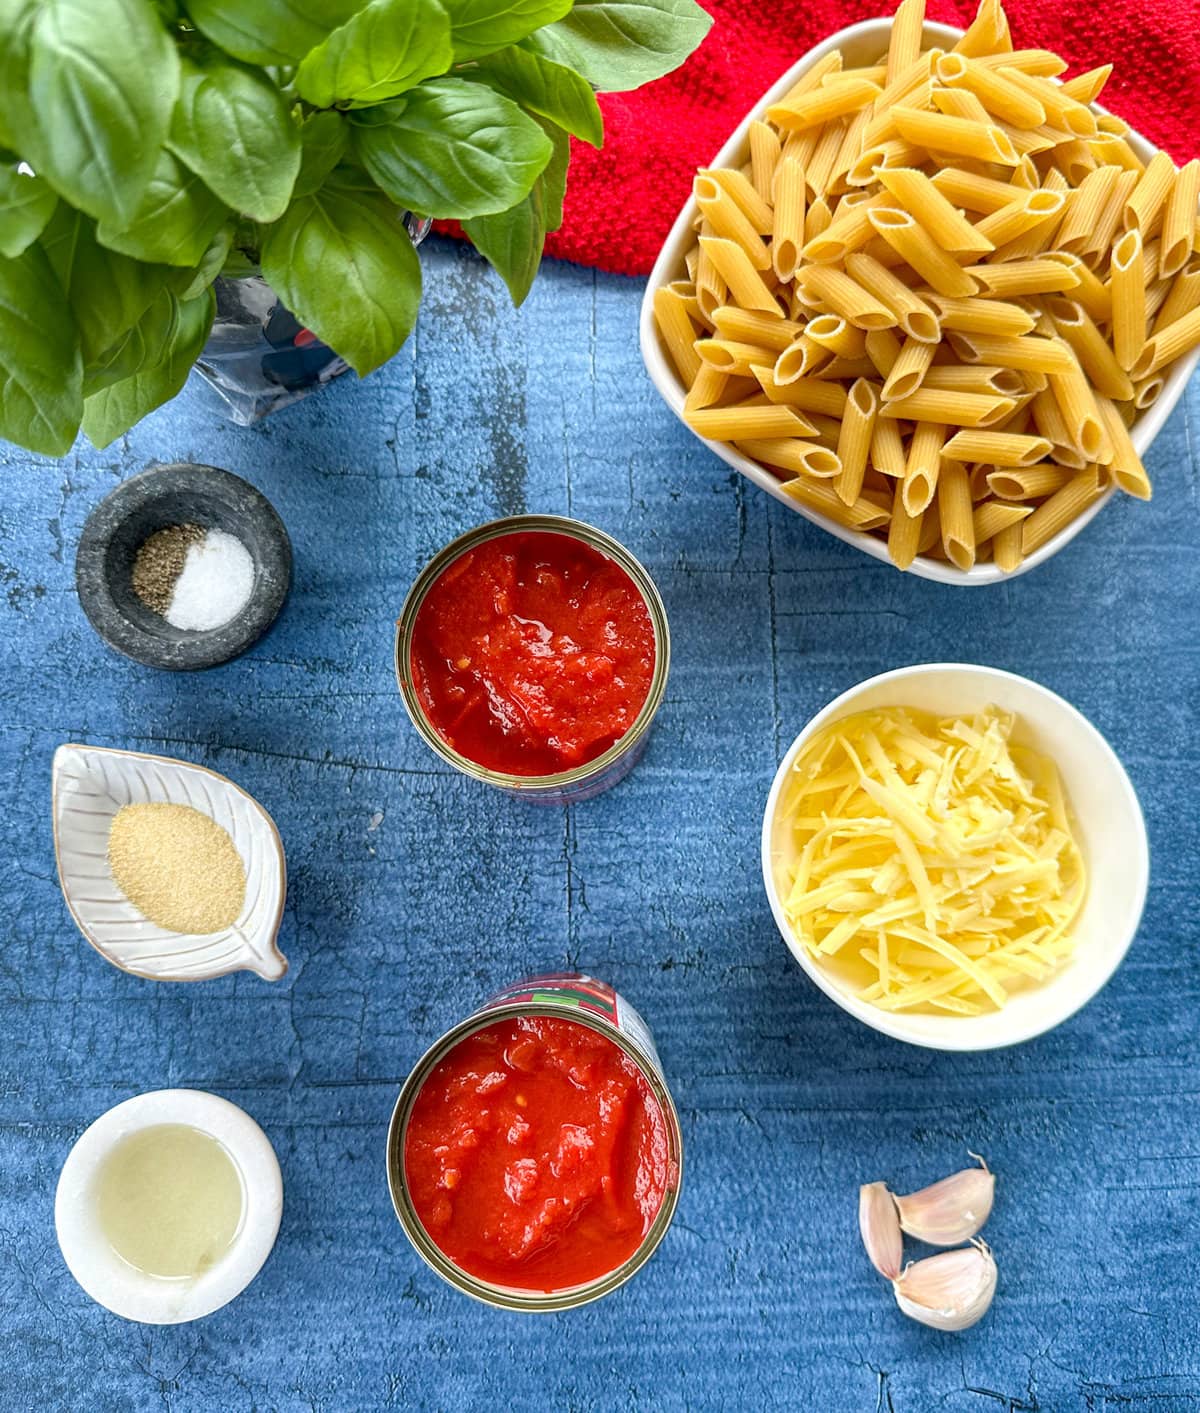 Ingredients used to make tomato and basil penne pasta, see the recipe card for full details 